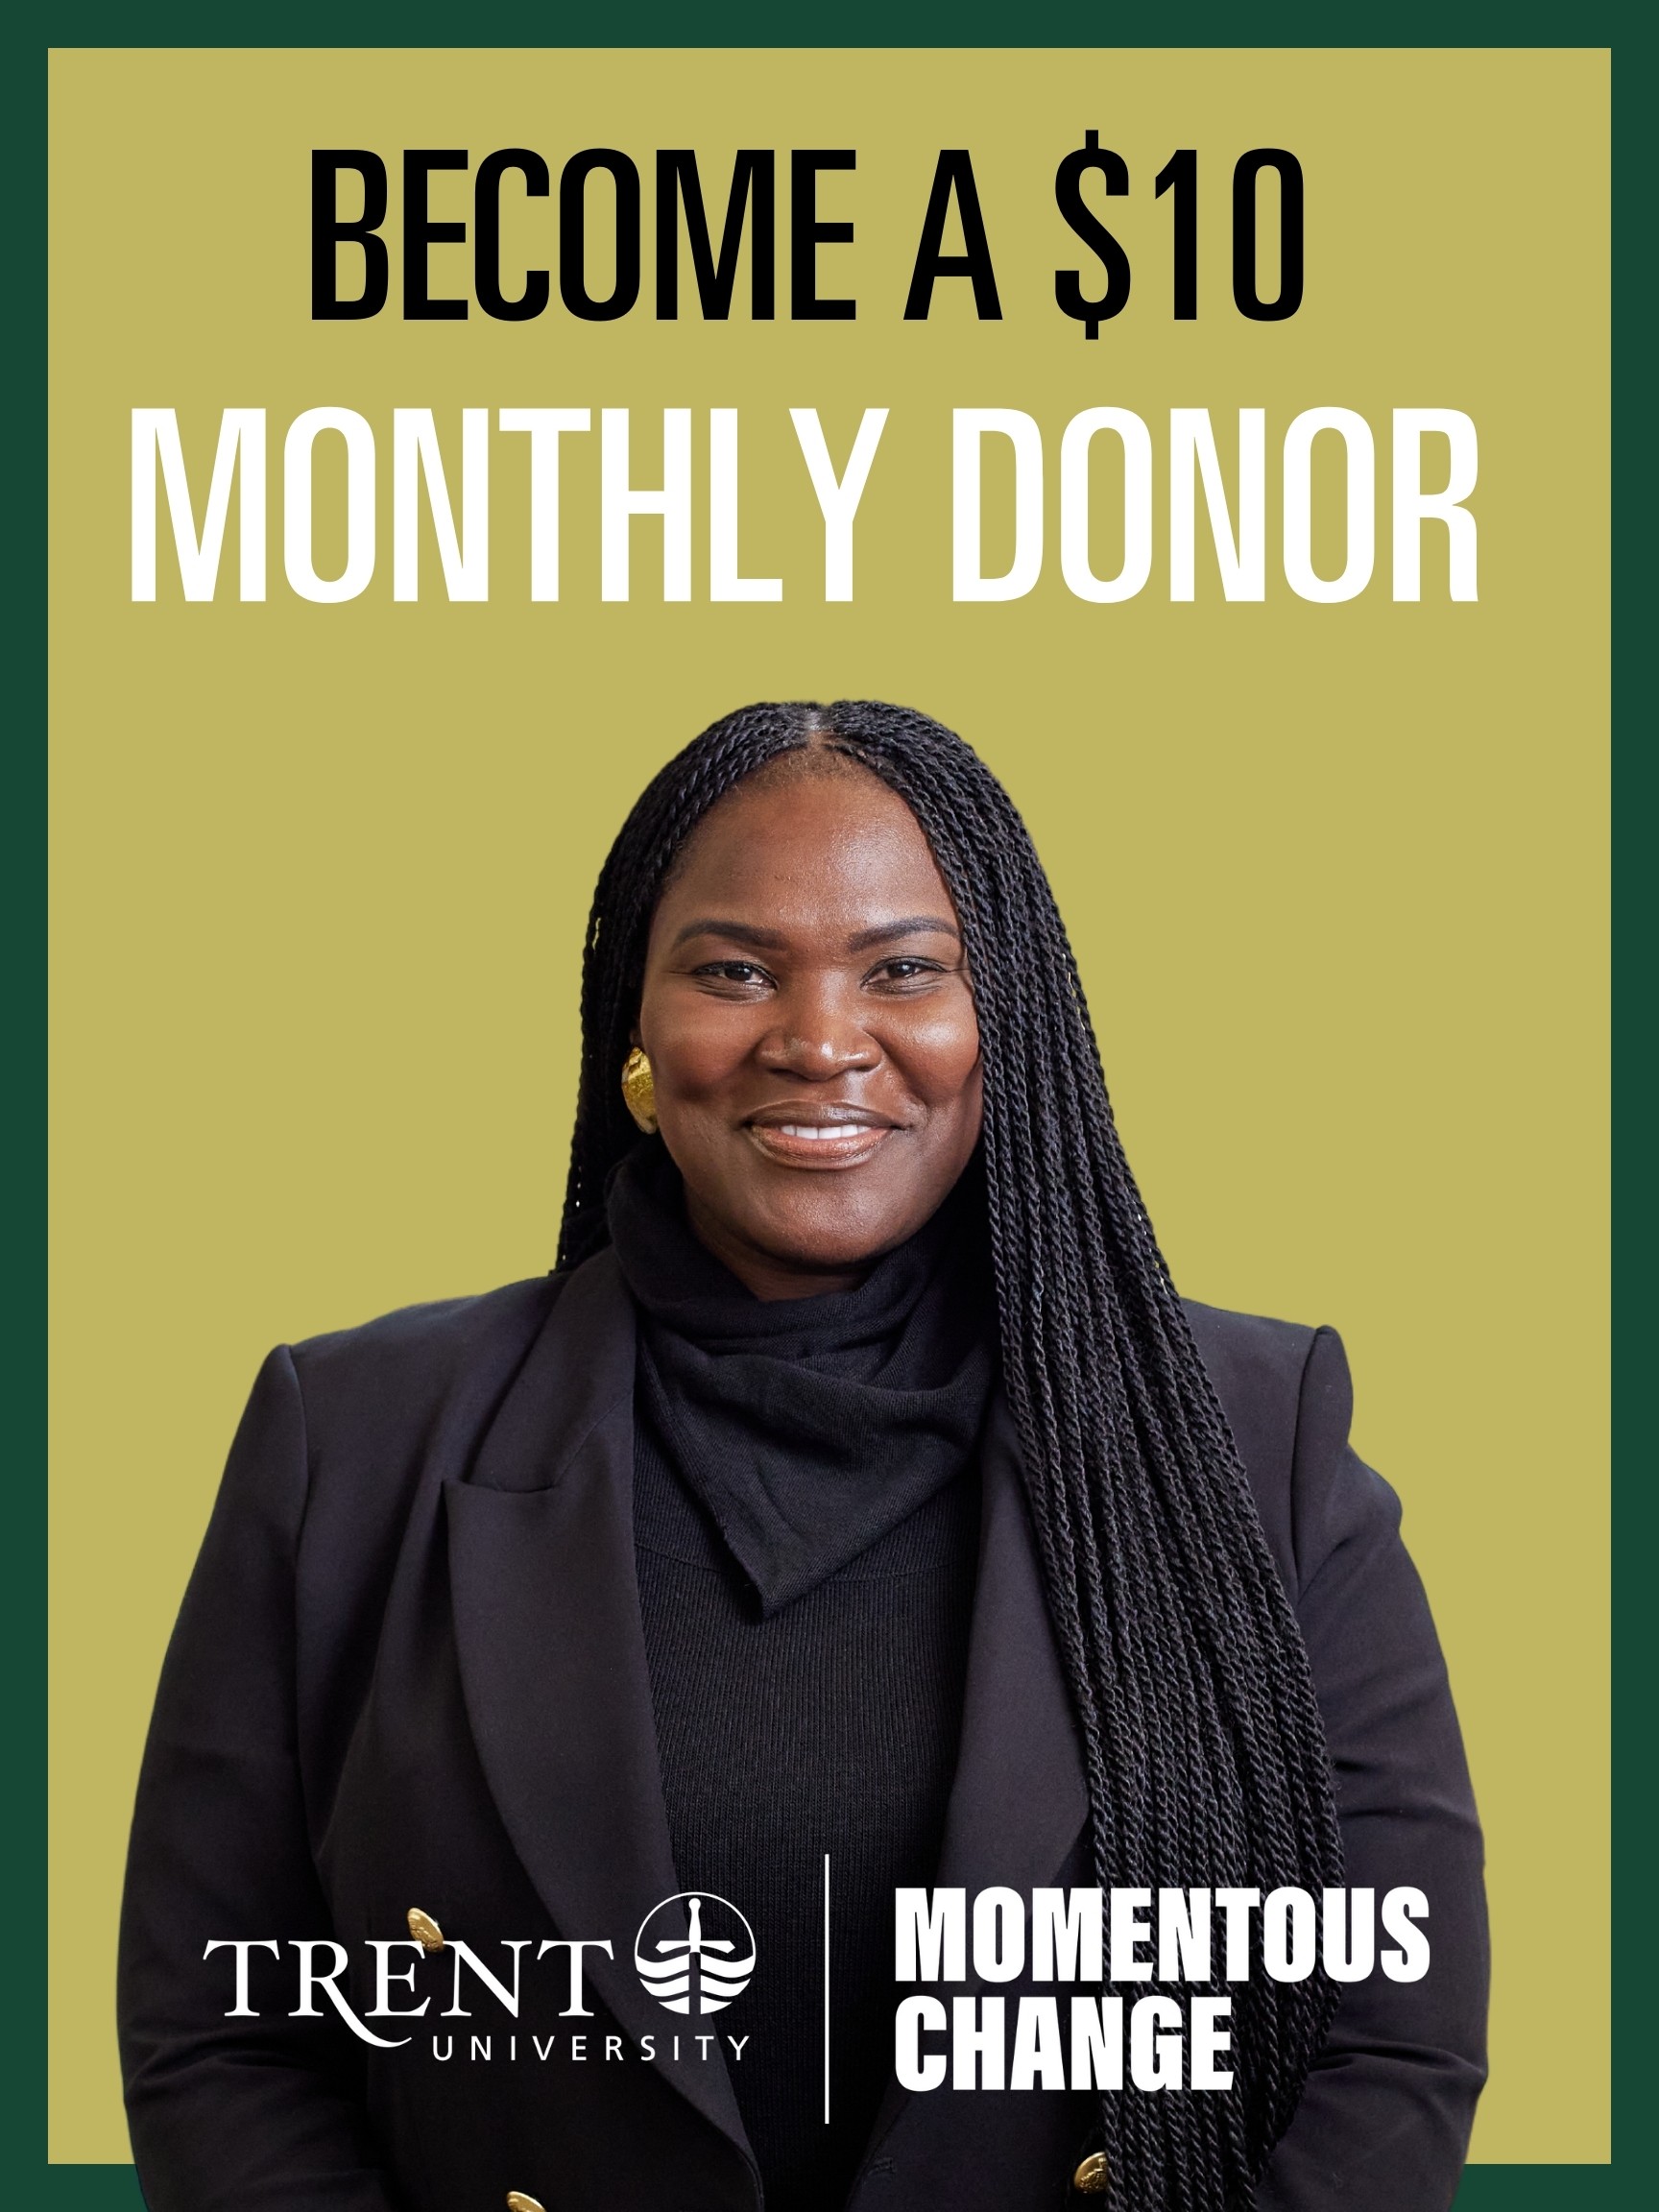 Become a $10 monthly donor